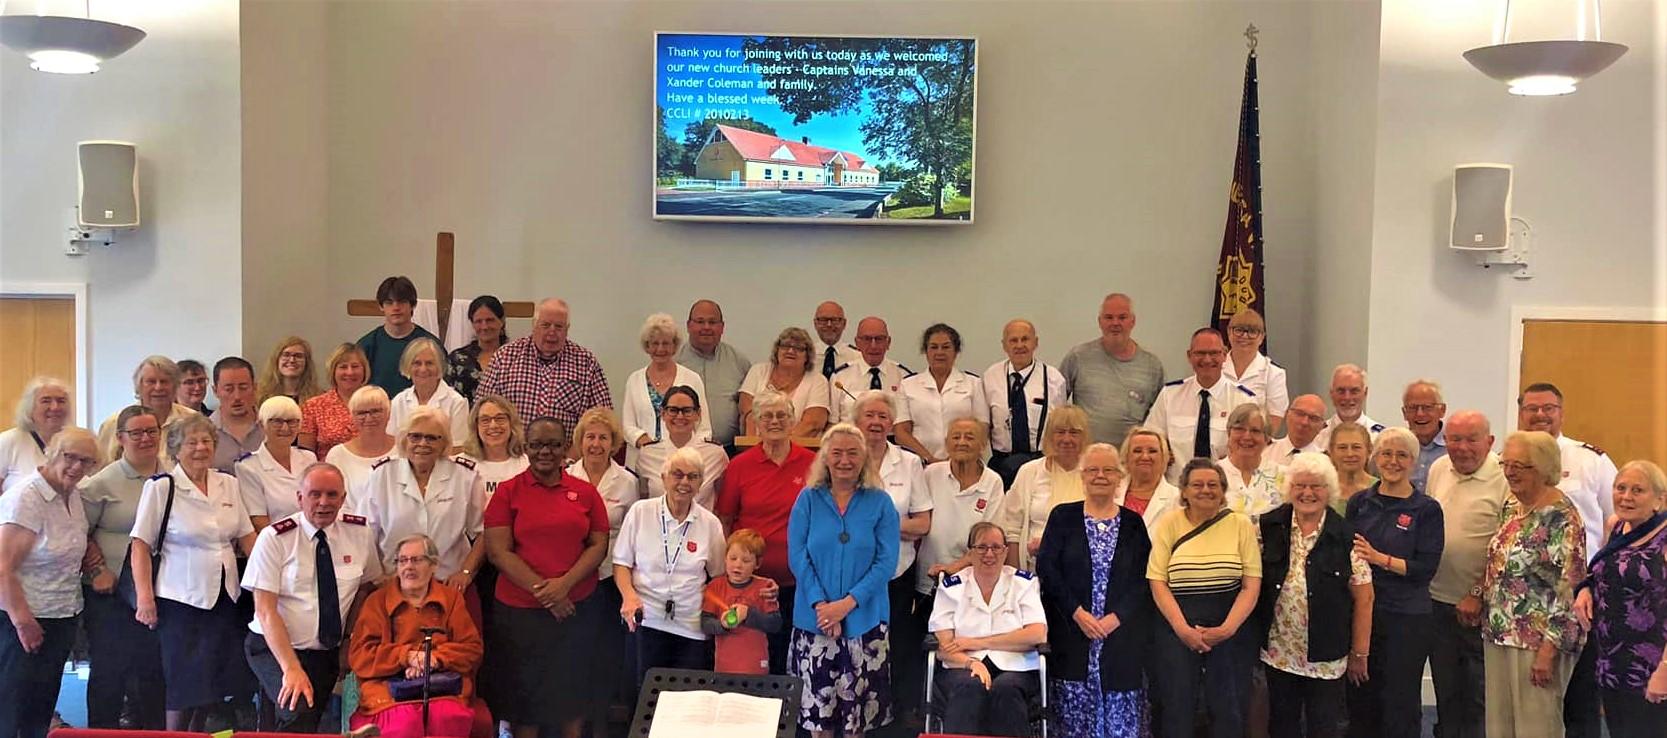 A picture of the Woking Salvation Army church family